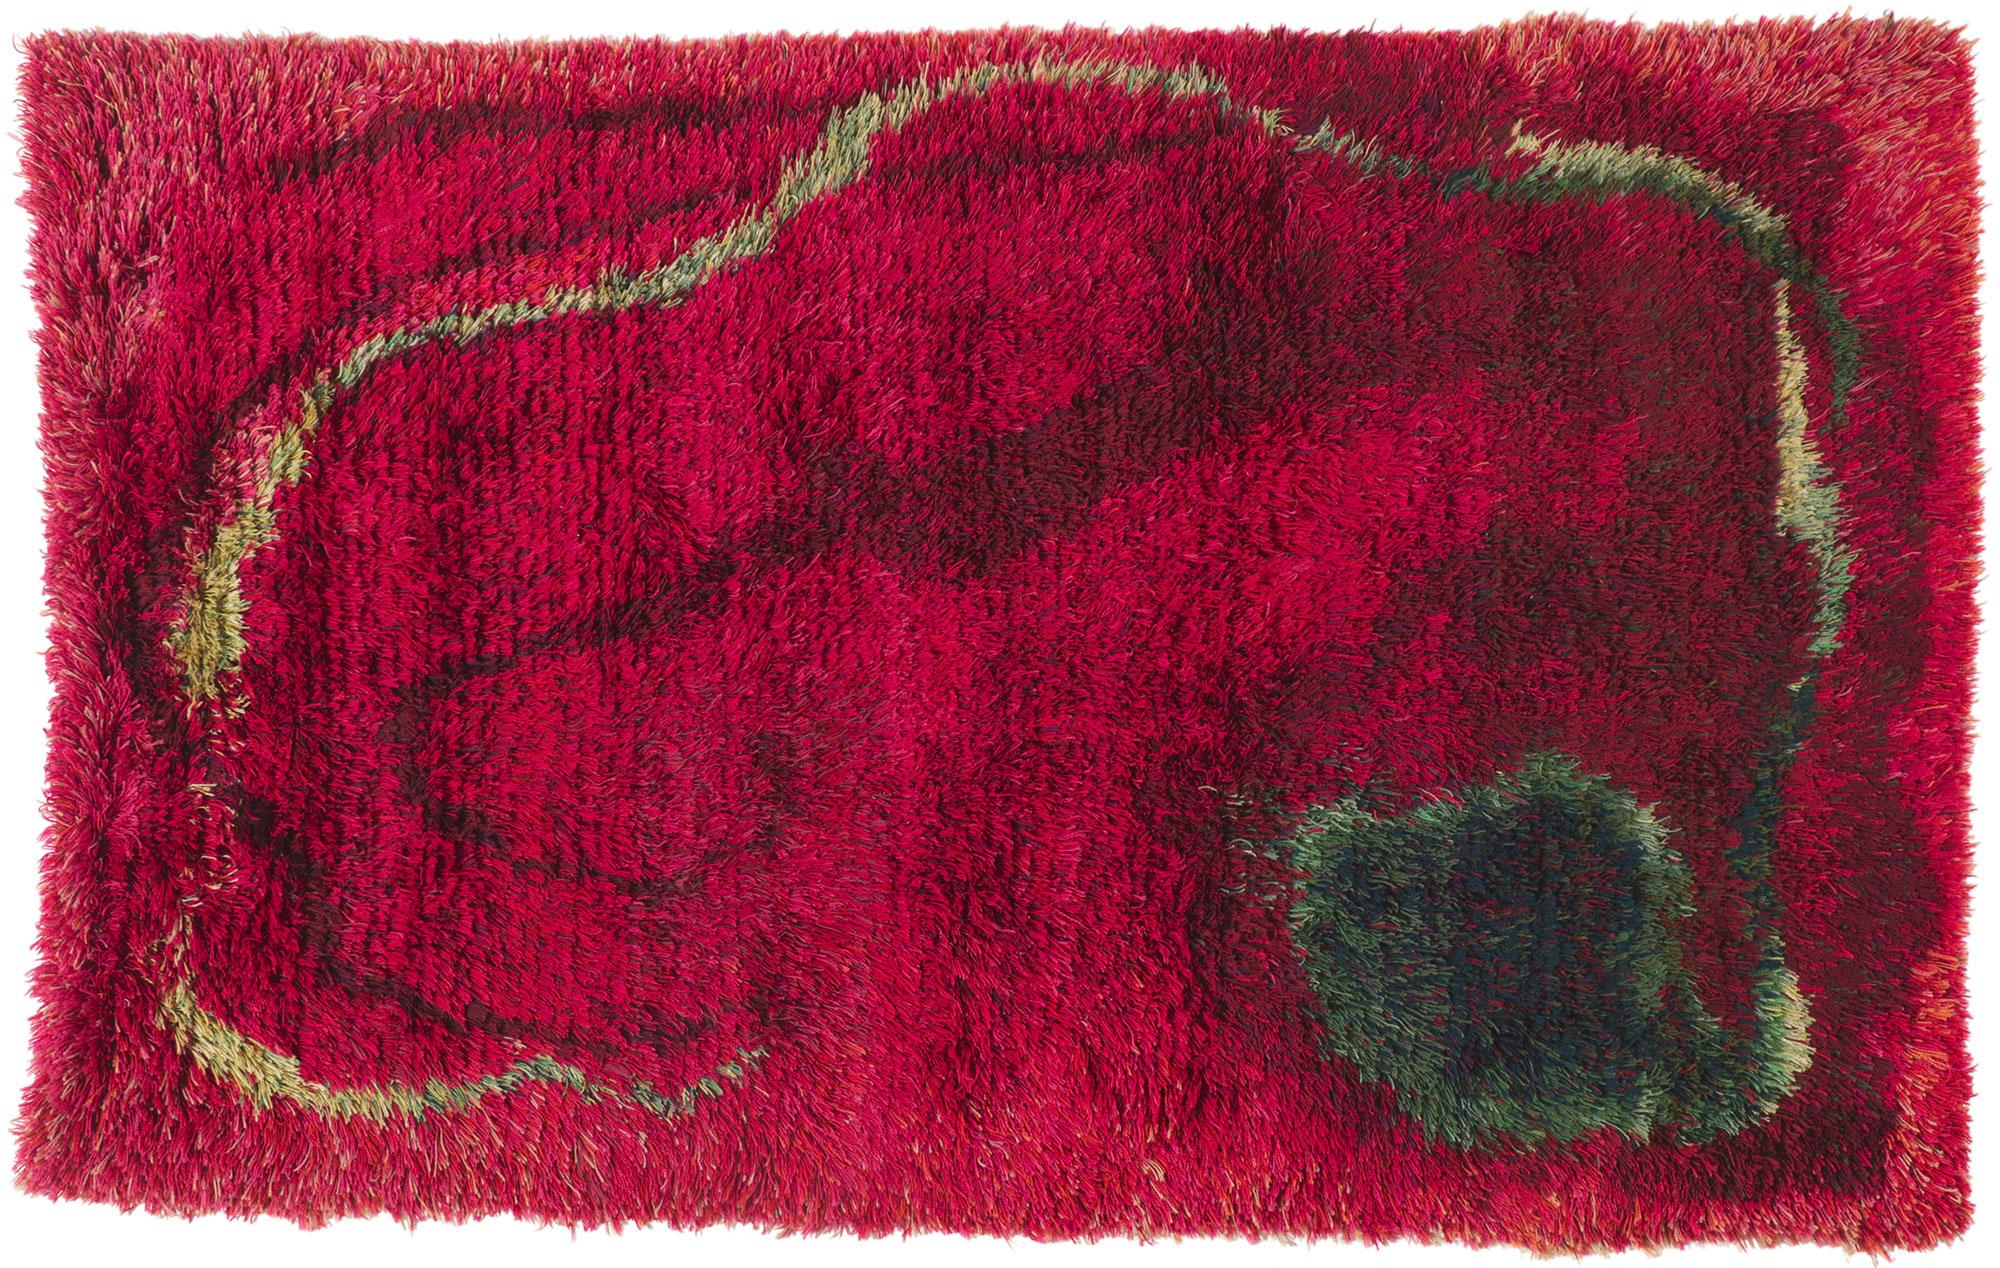 78474 Vintage Swedish Rya Rug, 04'10 x 07'09. A traditional Swedish Rya rug, originating from Sweden, is distinguished by its long pile, typically crafted from wool and featuring a specific knotting technique known as 